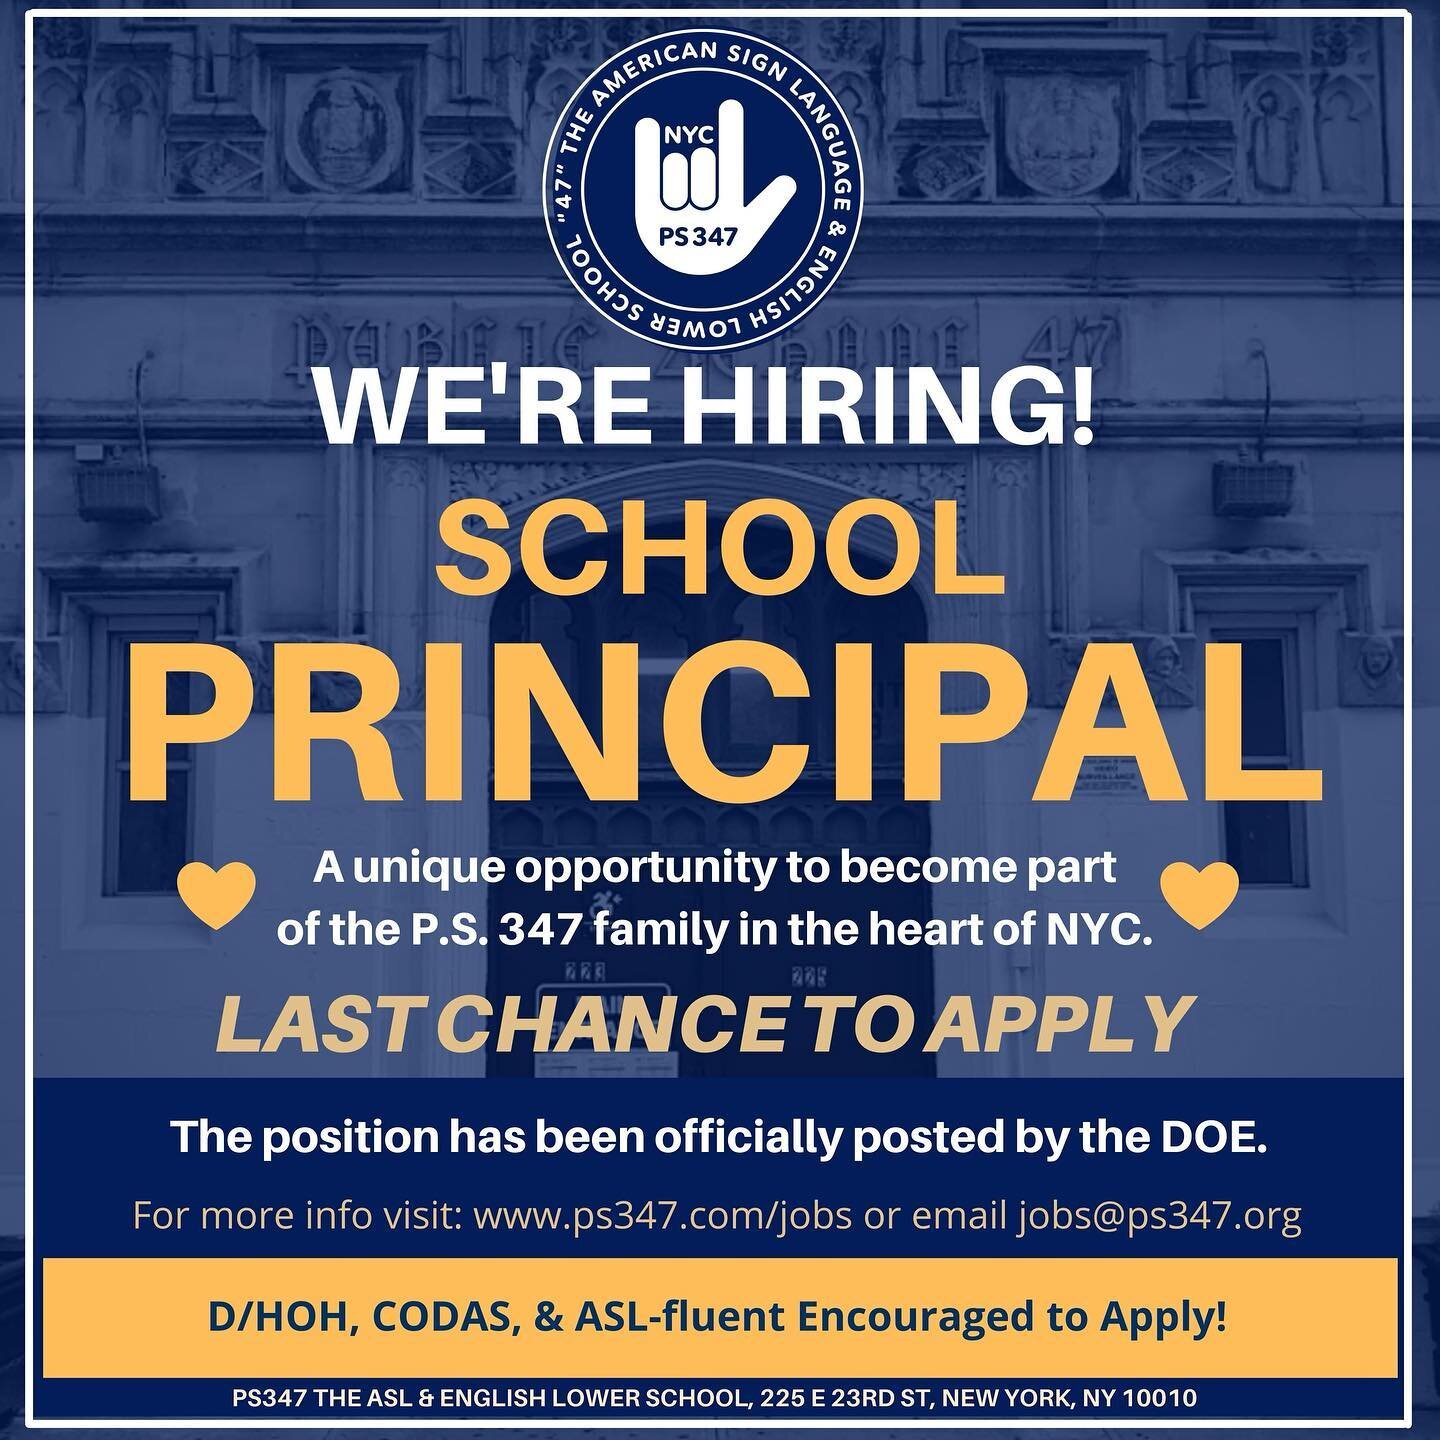 It&rsquo;s official: we are hiring a new principal! The DOE has posted the position online. We are looking for an amazing new principal starting this fall 2022. It&rsquo;s an incredible opportunity to lead a one-of-a-kind bilingual, bicultural school